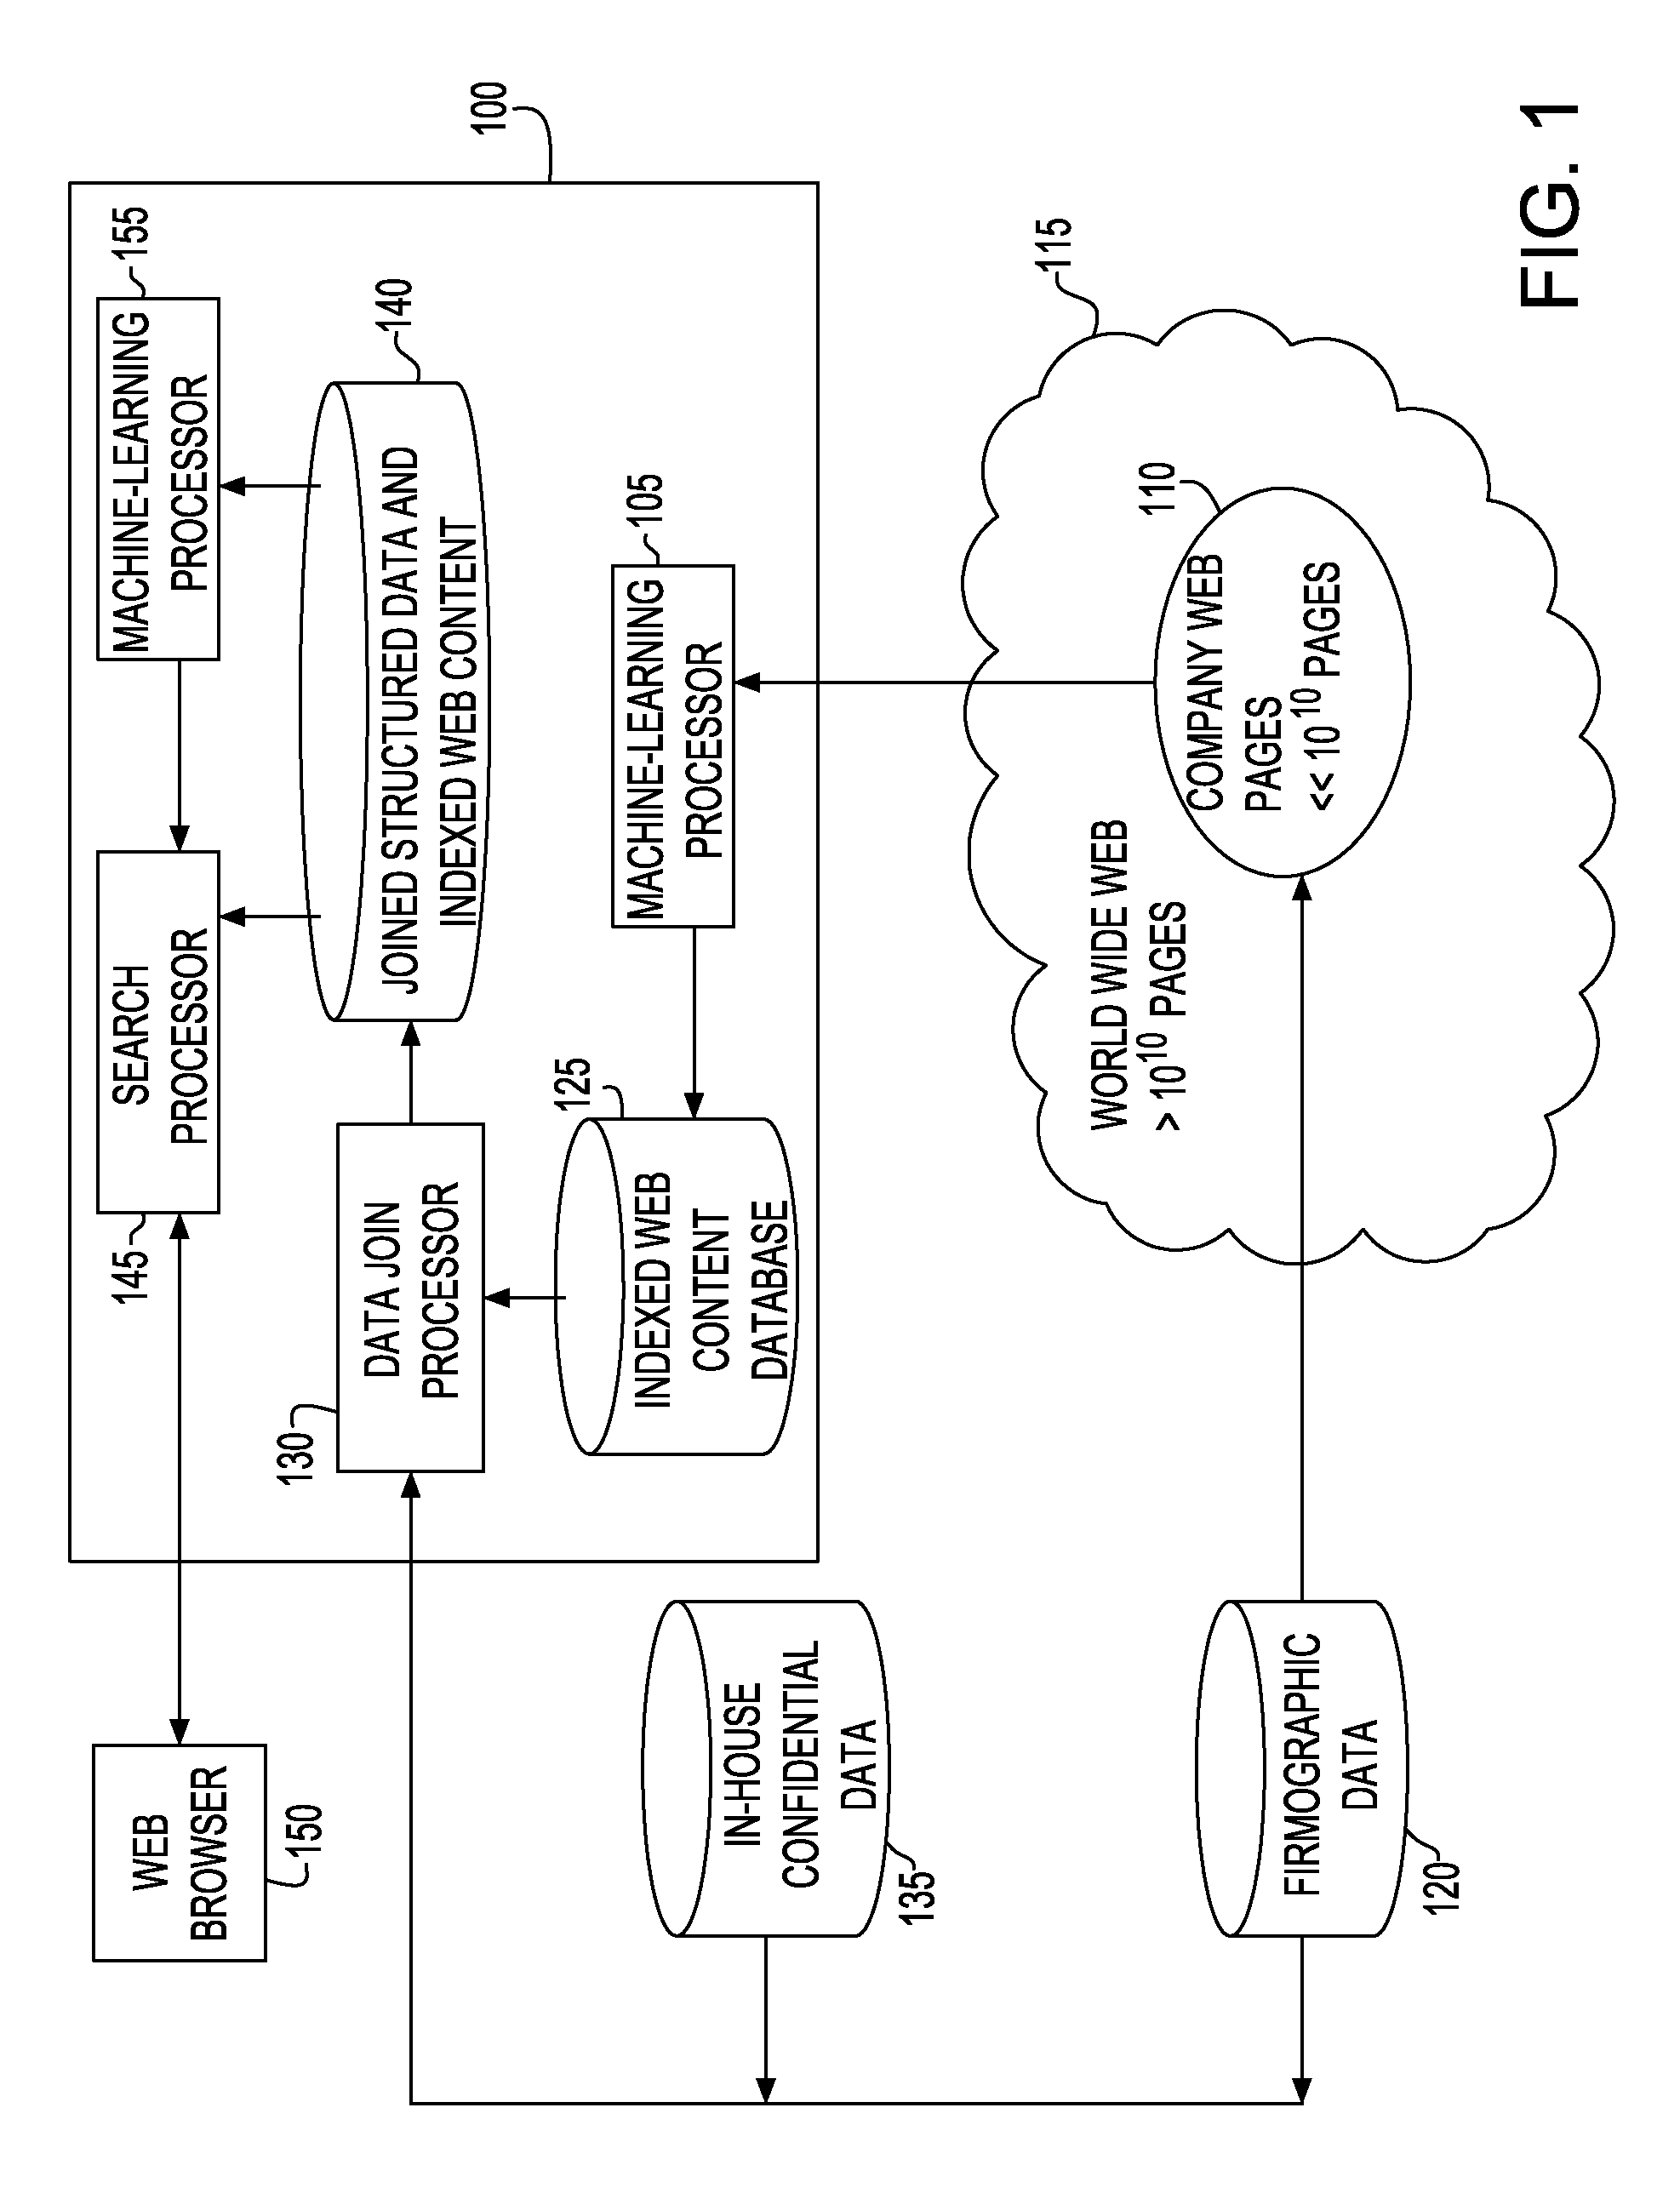 Method and system for identifying companies with specific business objectives